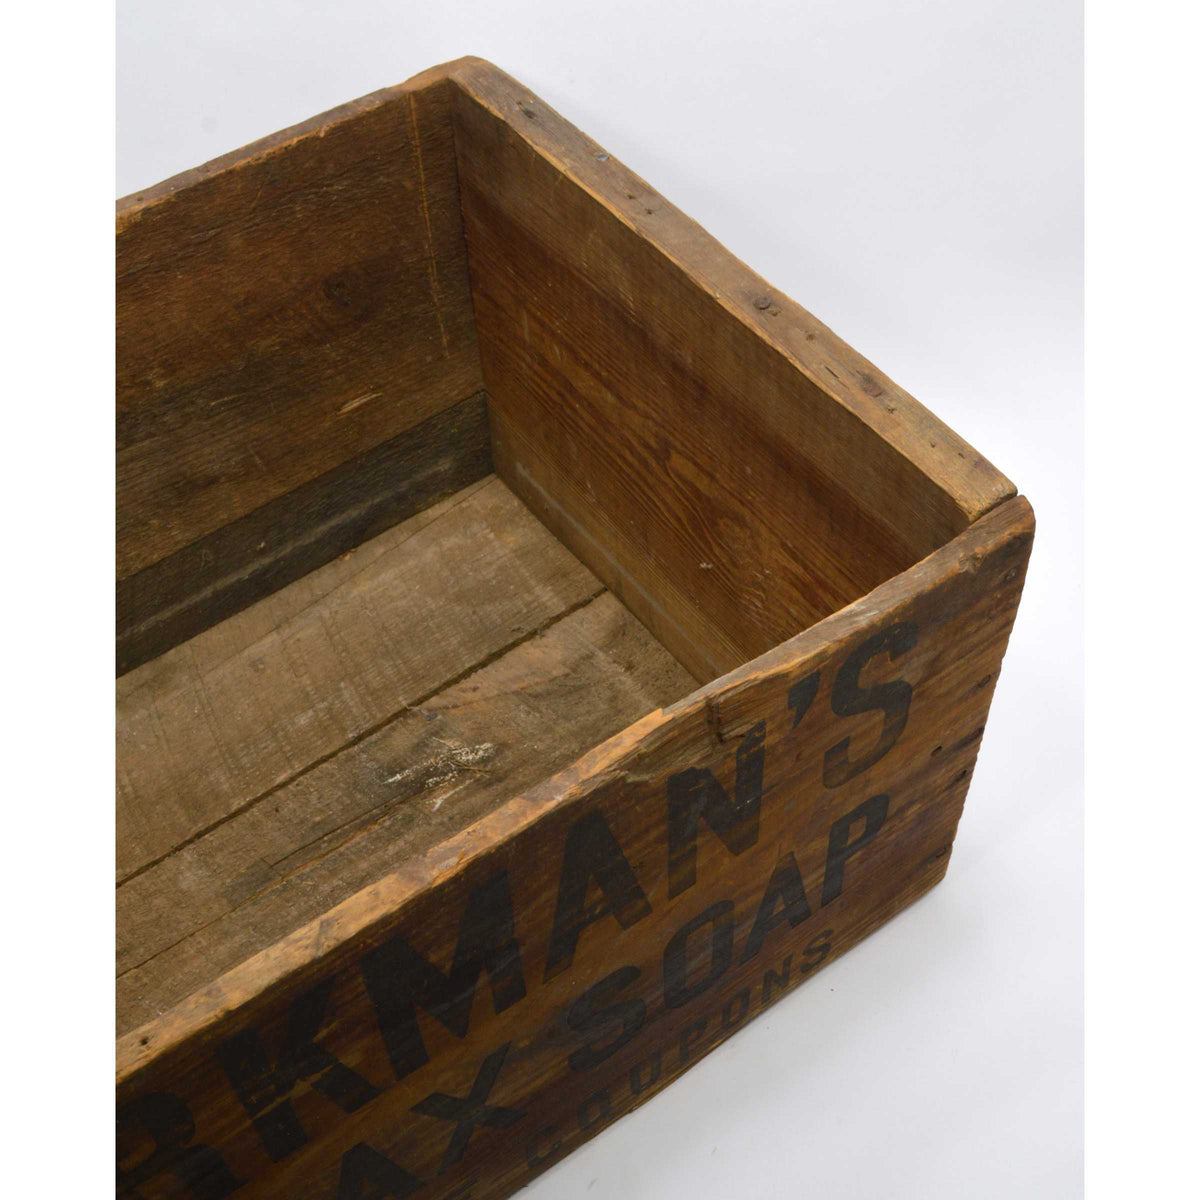 Old soap box  Vintage crates, Wooden crate boxes, Crate decor